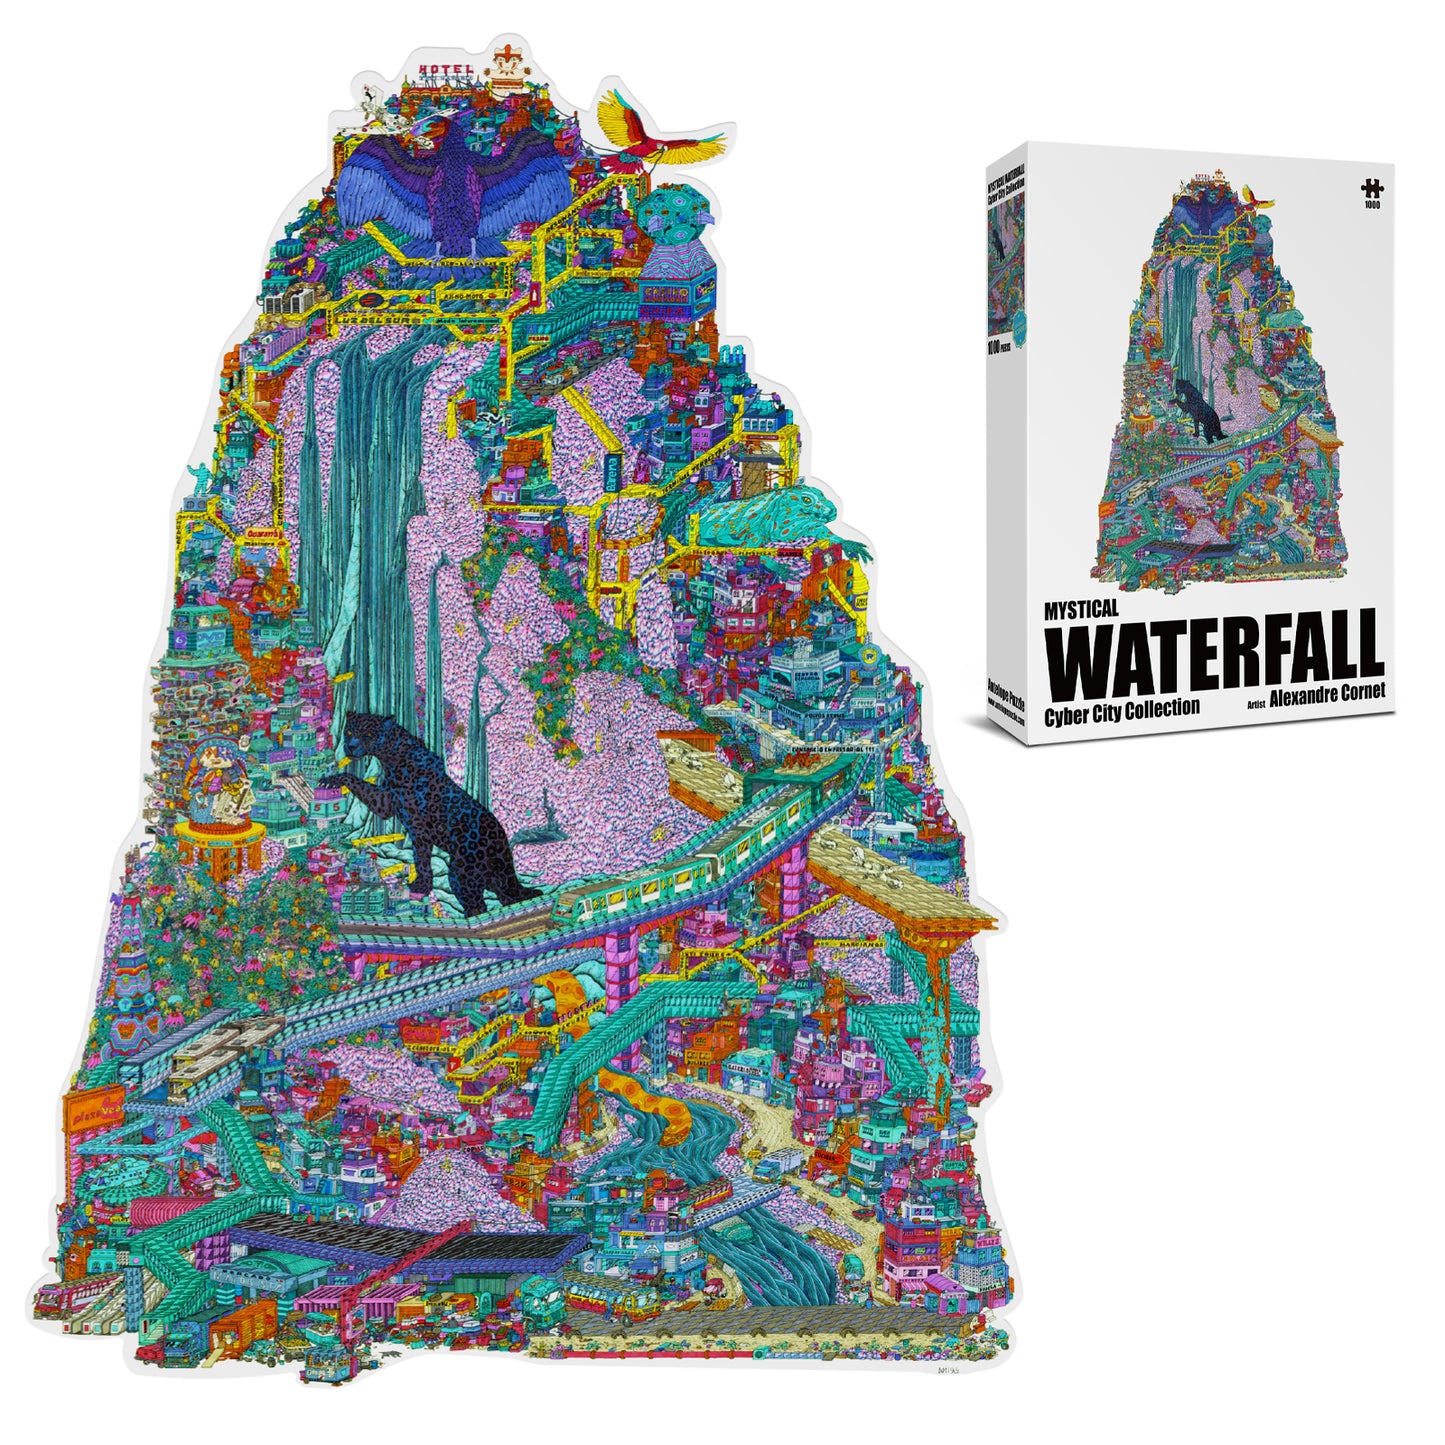 Antelope The Mystical Waterfall Cyber City 1000 Piece Jigsaw Puzzle